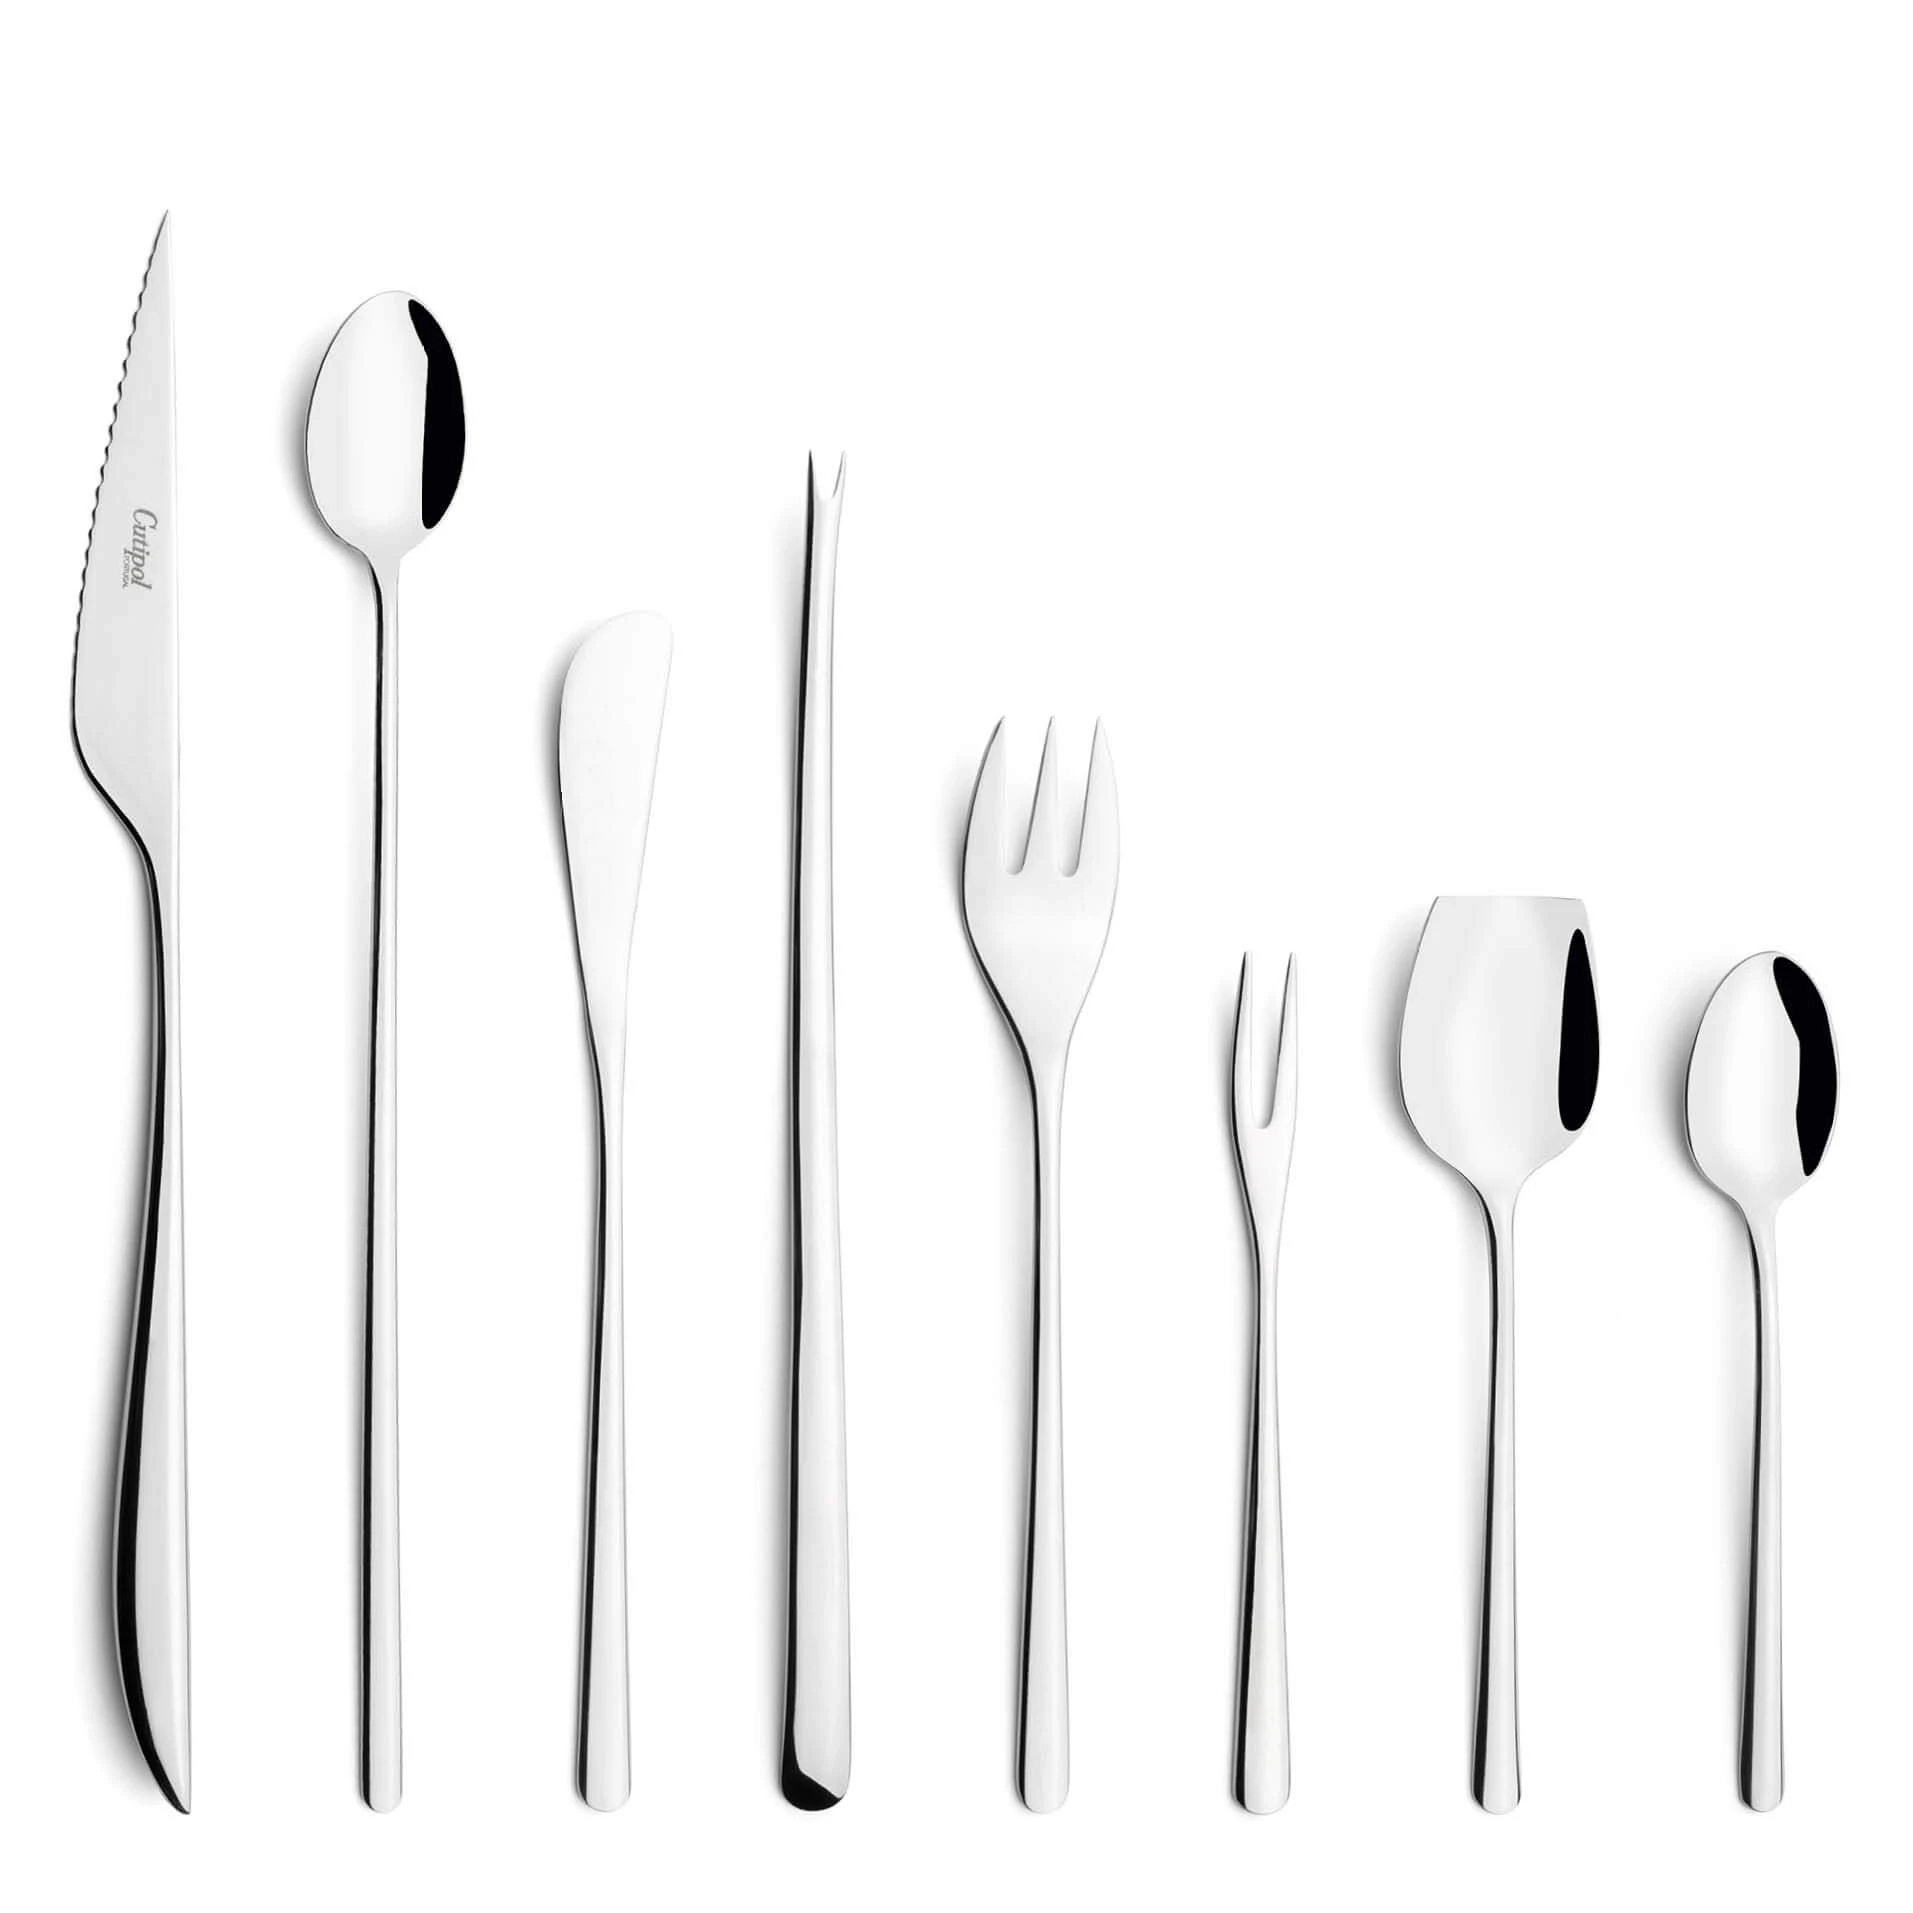 Cutipol Cutlery Icon with Steak Knife, long drink spoorn, butter knife, lobster fork, oyster fork, snail fork, sugar spoon and moka spoon